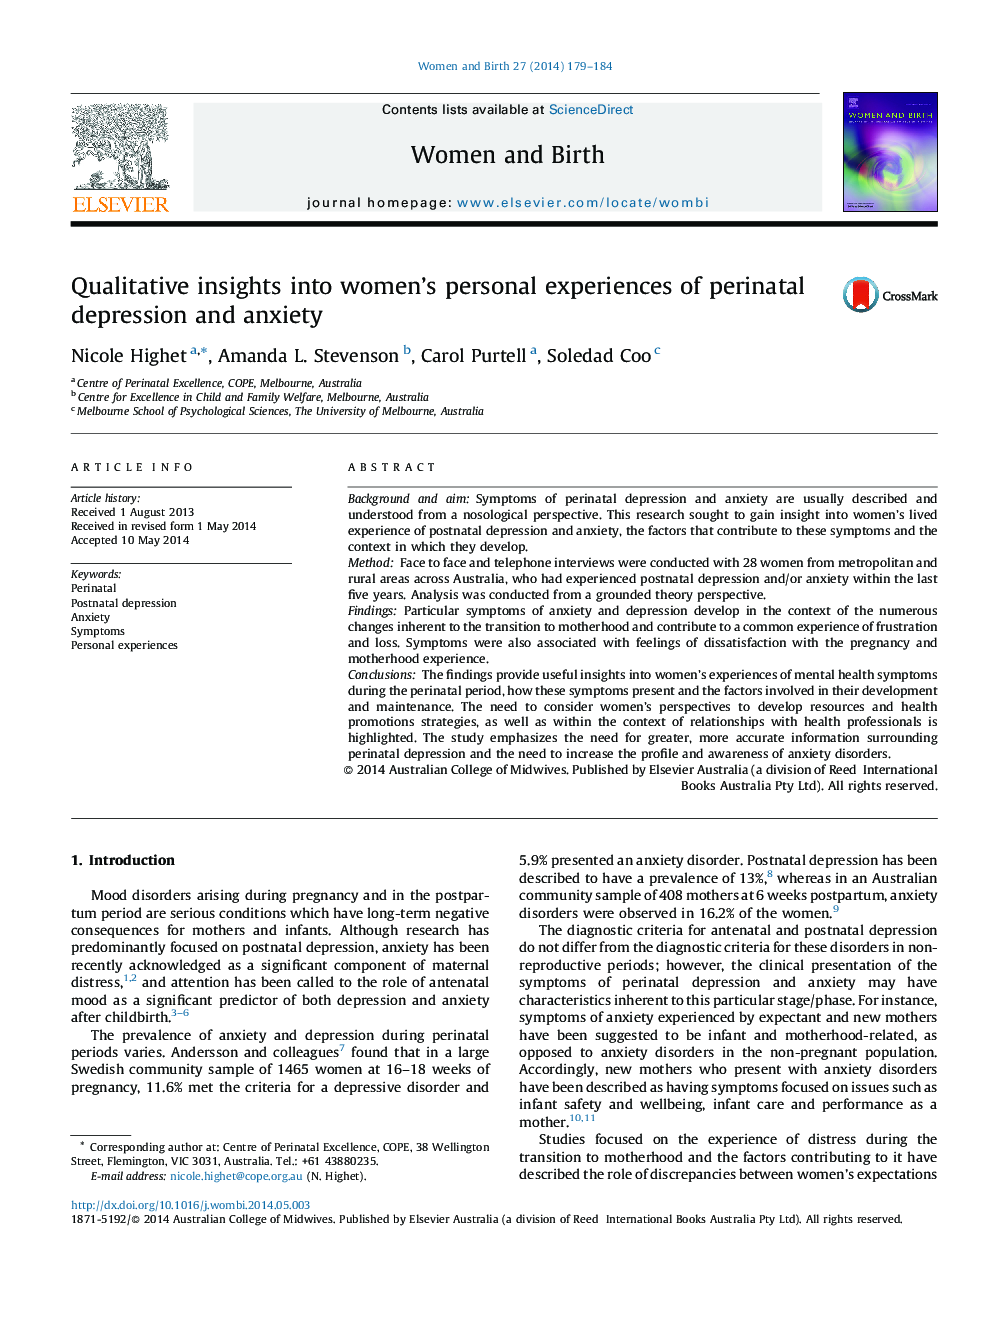 Qualitative insights into women's personal experiences of perinatal depression and anxiety